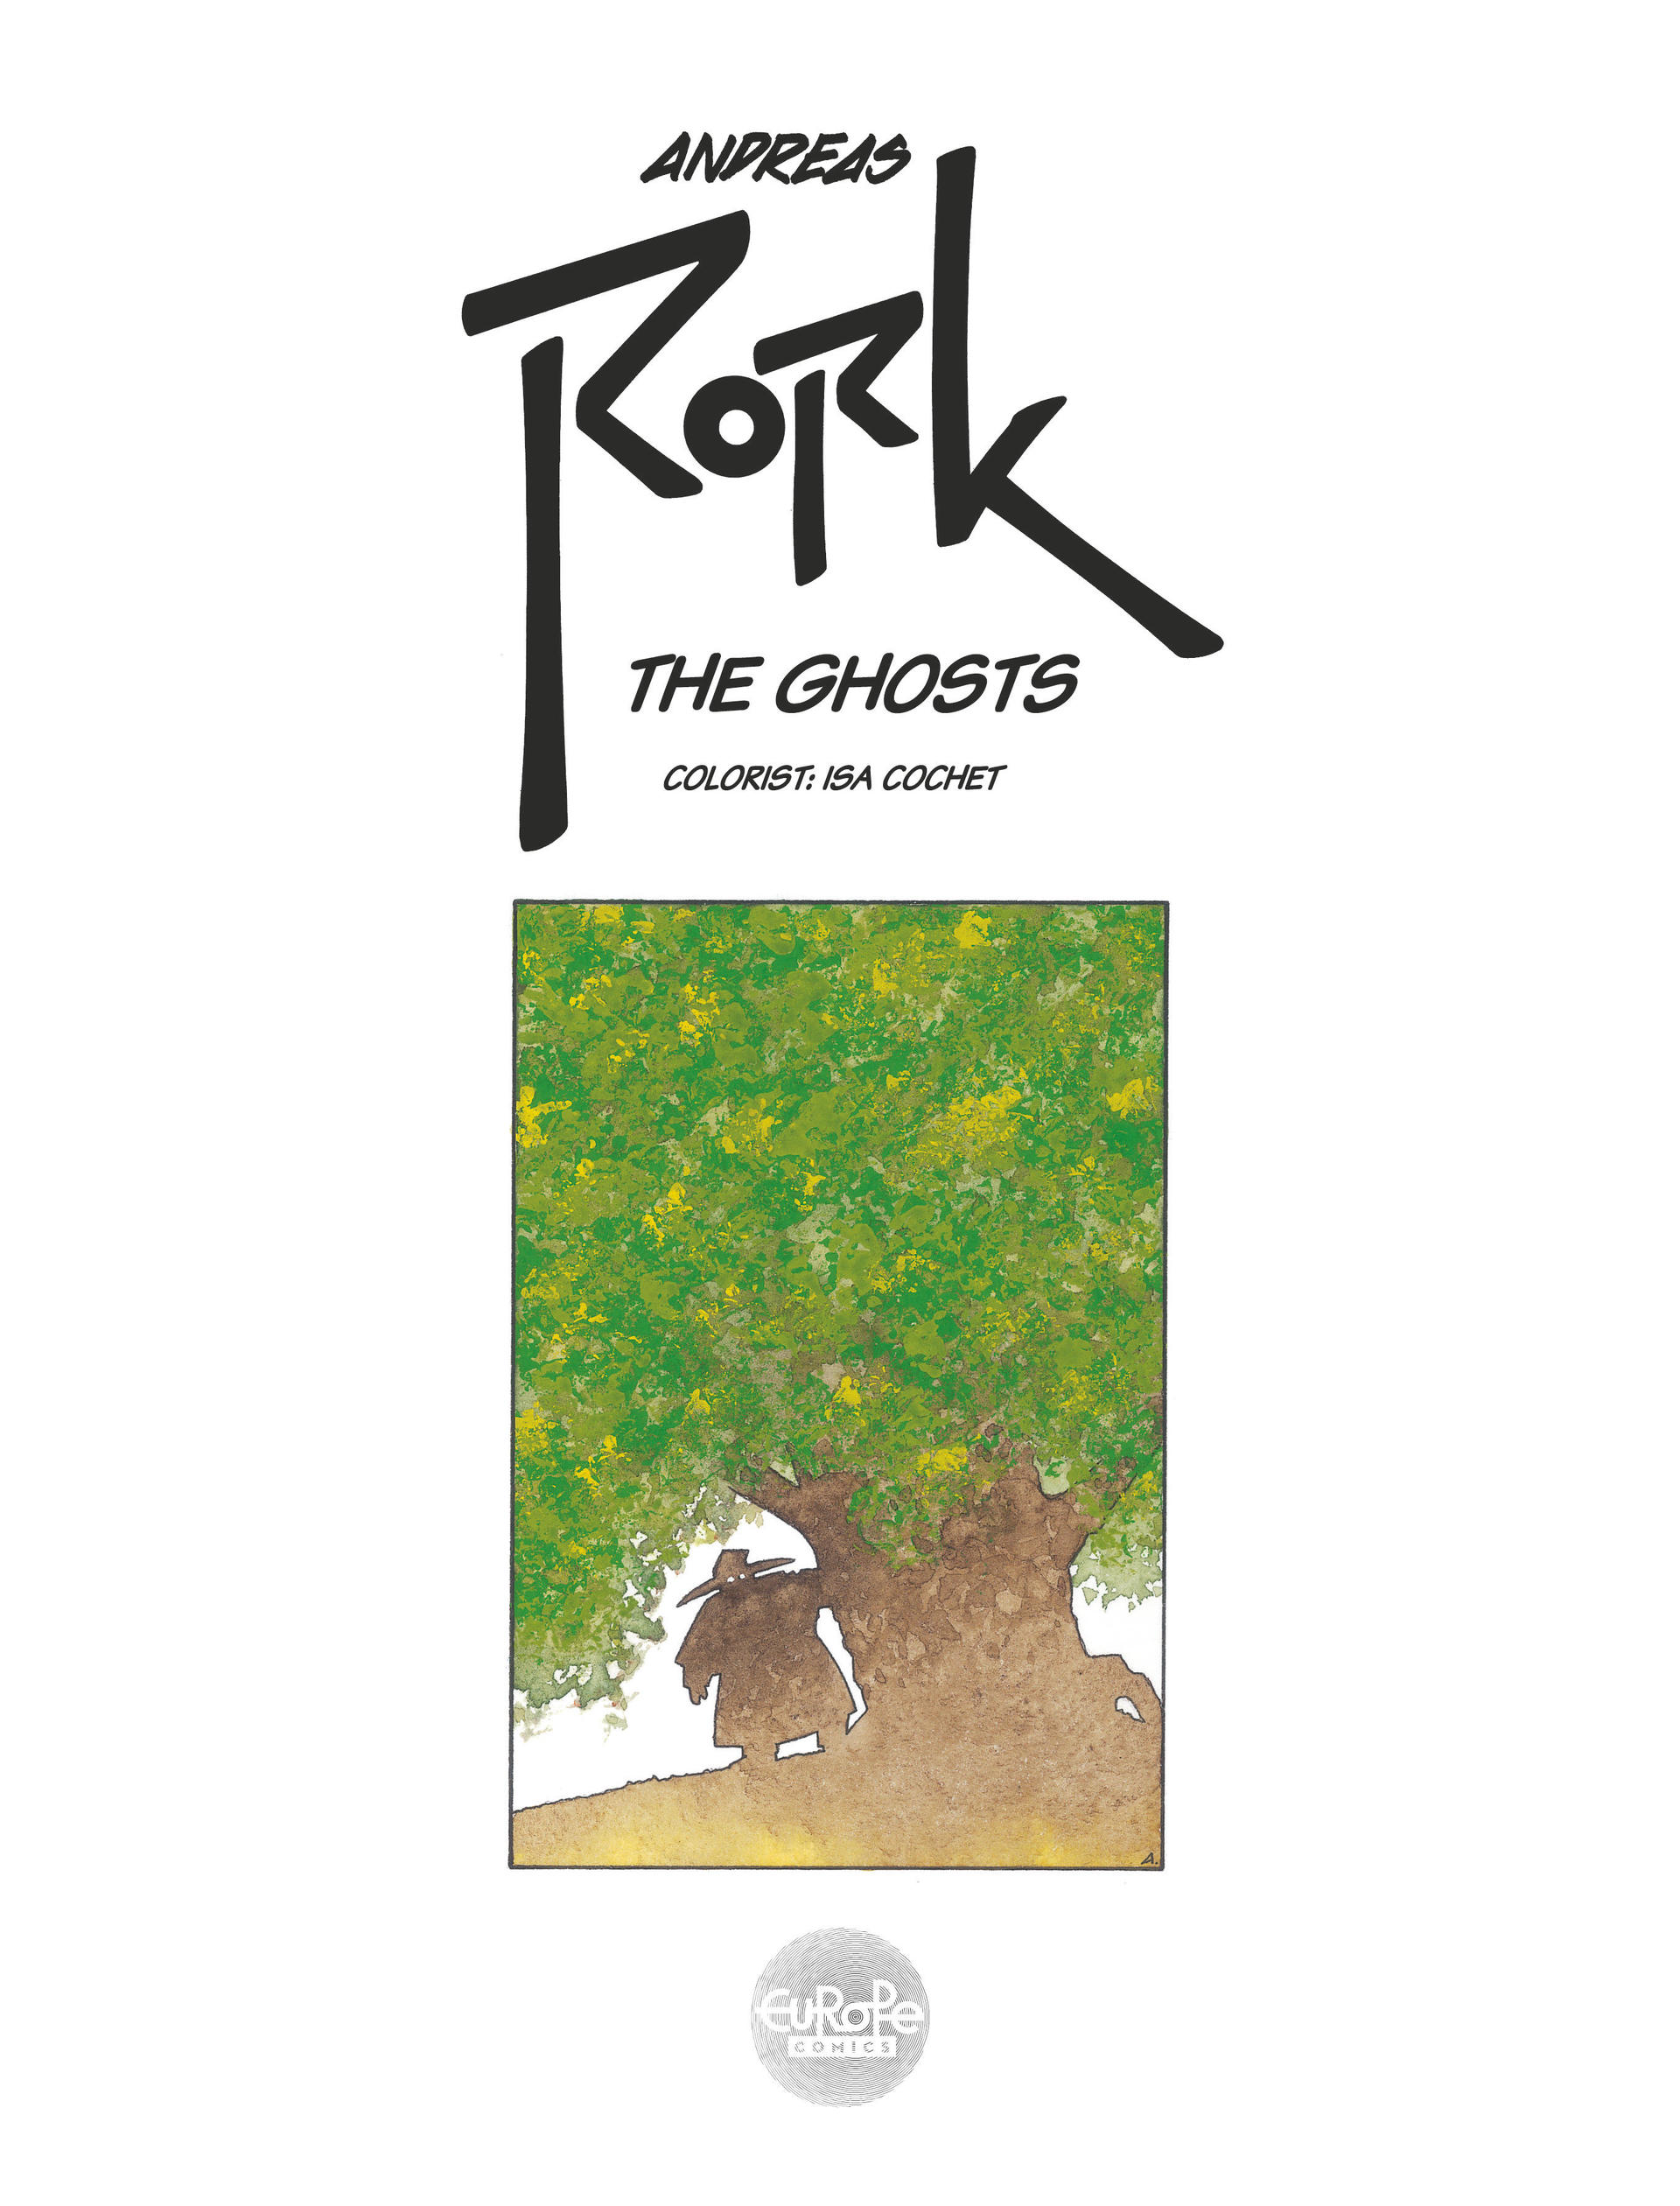 Read online Rork: The Ghosts comic -  Issue # Full - 2